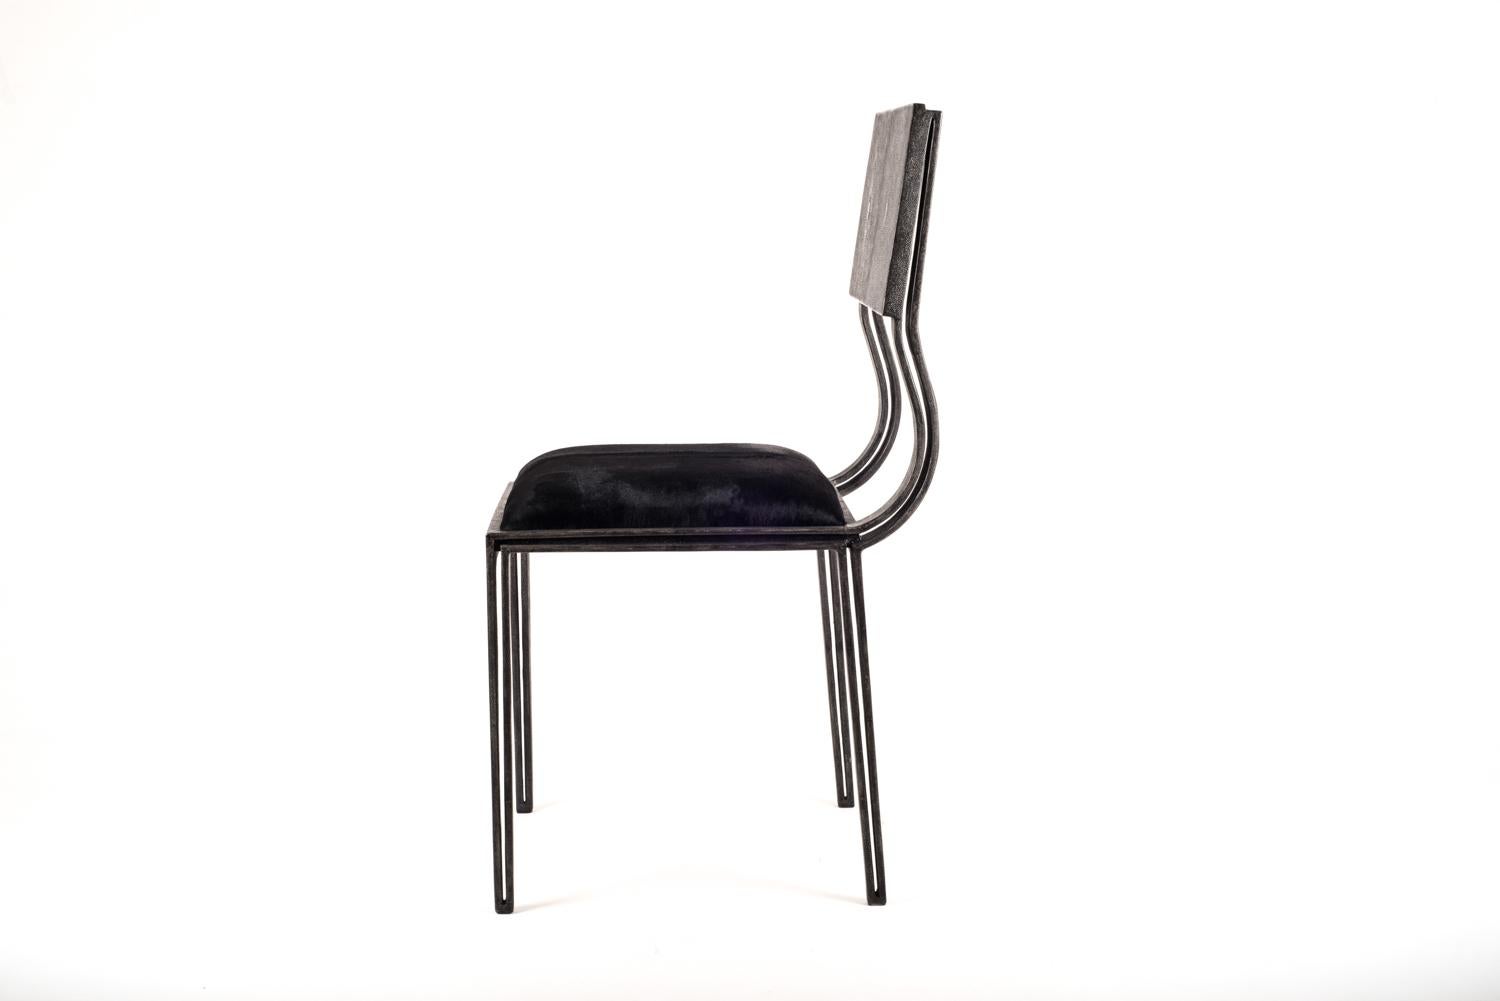 The Lola chair mixes elegance and comfort. Perfect for your dining room. The coal black shagreen legs are unique and subtle with it's indentation details that complement the overall piece. The seat is upholstered in a luxurious soft horsehair.